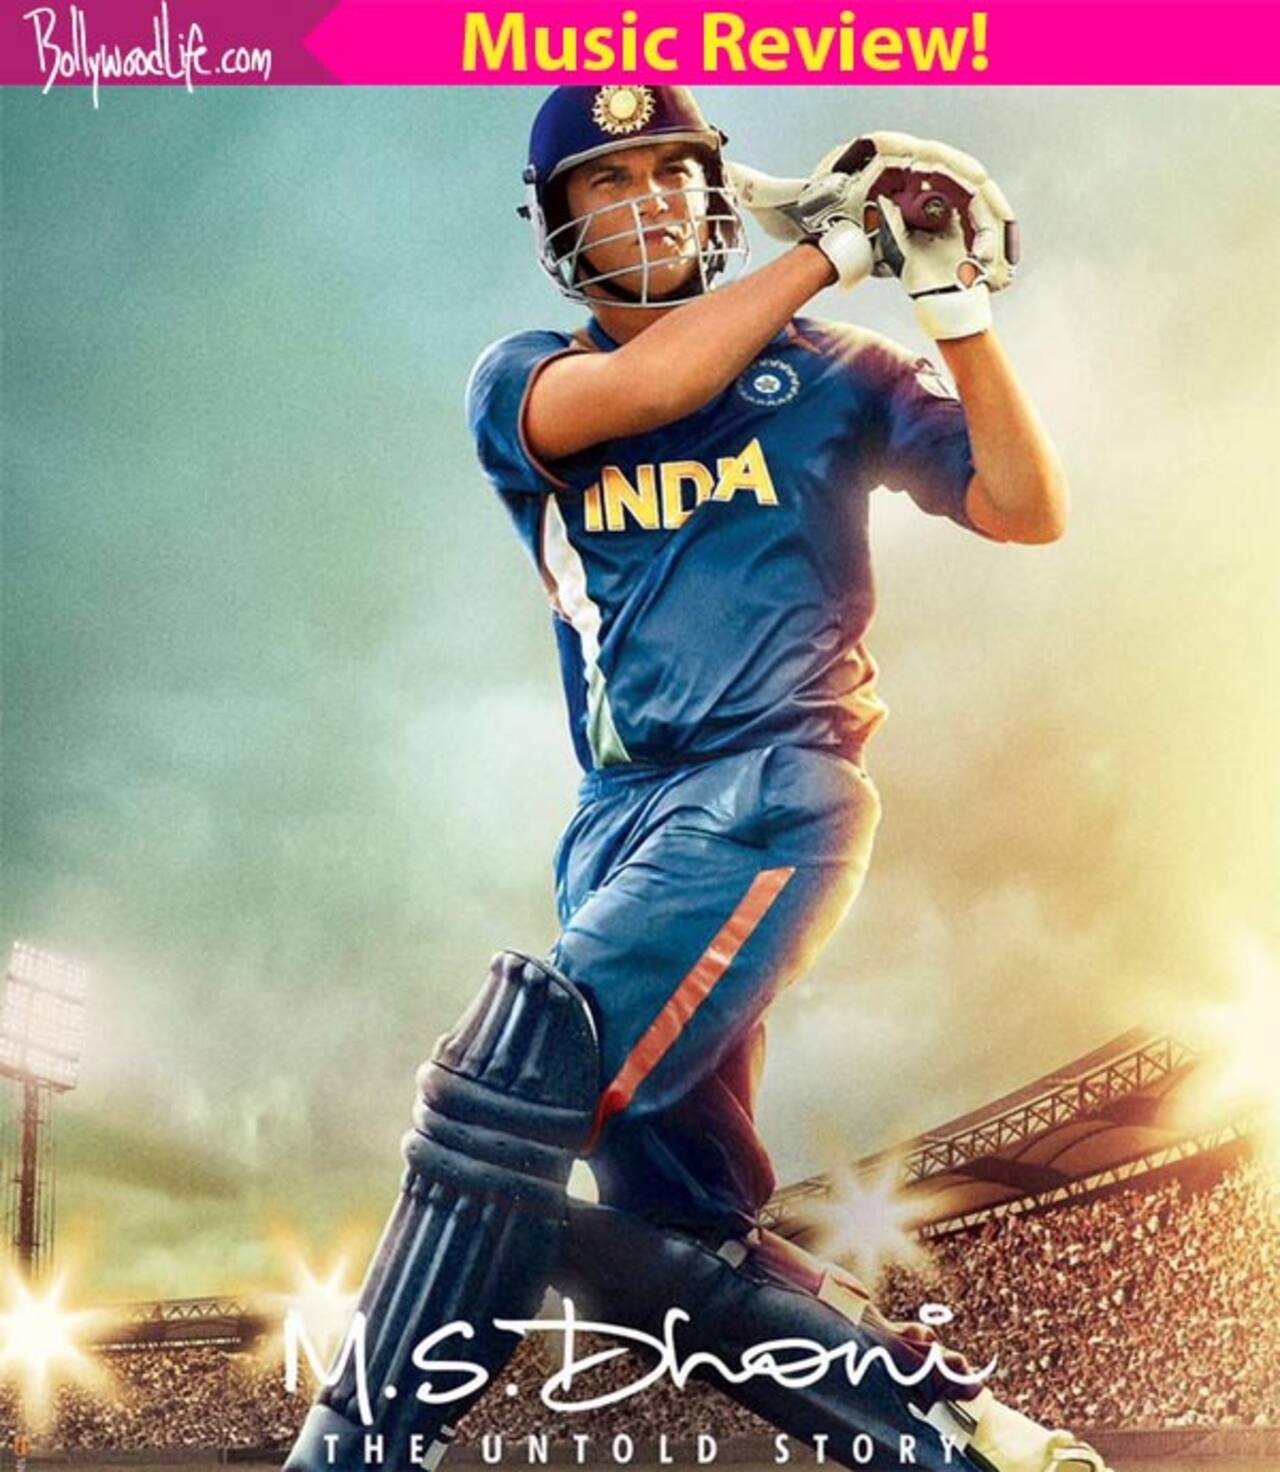 M.S. Dhoni- The Untold Story music review: The music of this Sushant Singh Rajput starrer is a must listen for all the romantic hearts!